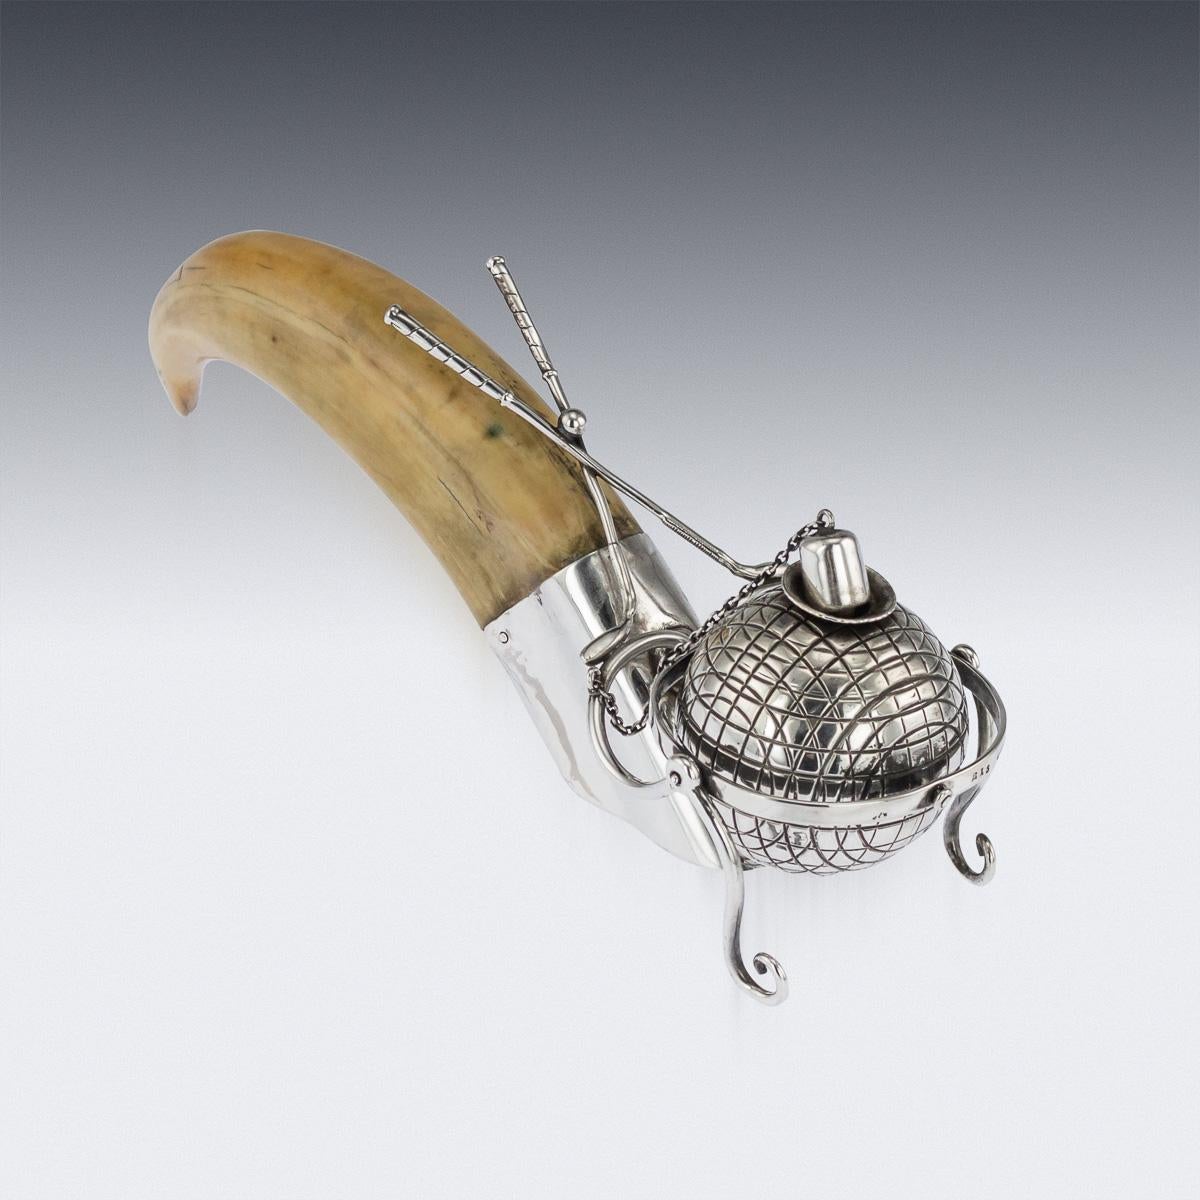 Antique early 20th century American very unusual, novelty solid silver gimbal golf themed lighter, of unusual design, the ball gimbol shaped as a golf ball, mounted with a tusk and adorned by two golf sticks. Hallmarked Sterling (925 silver